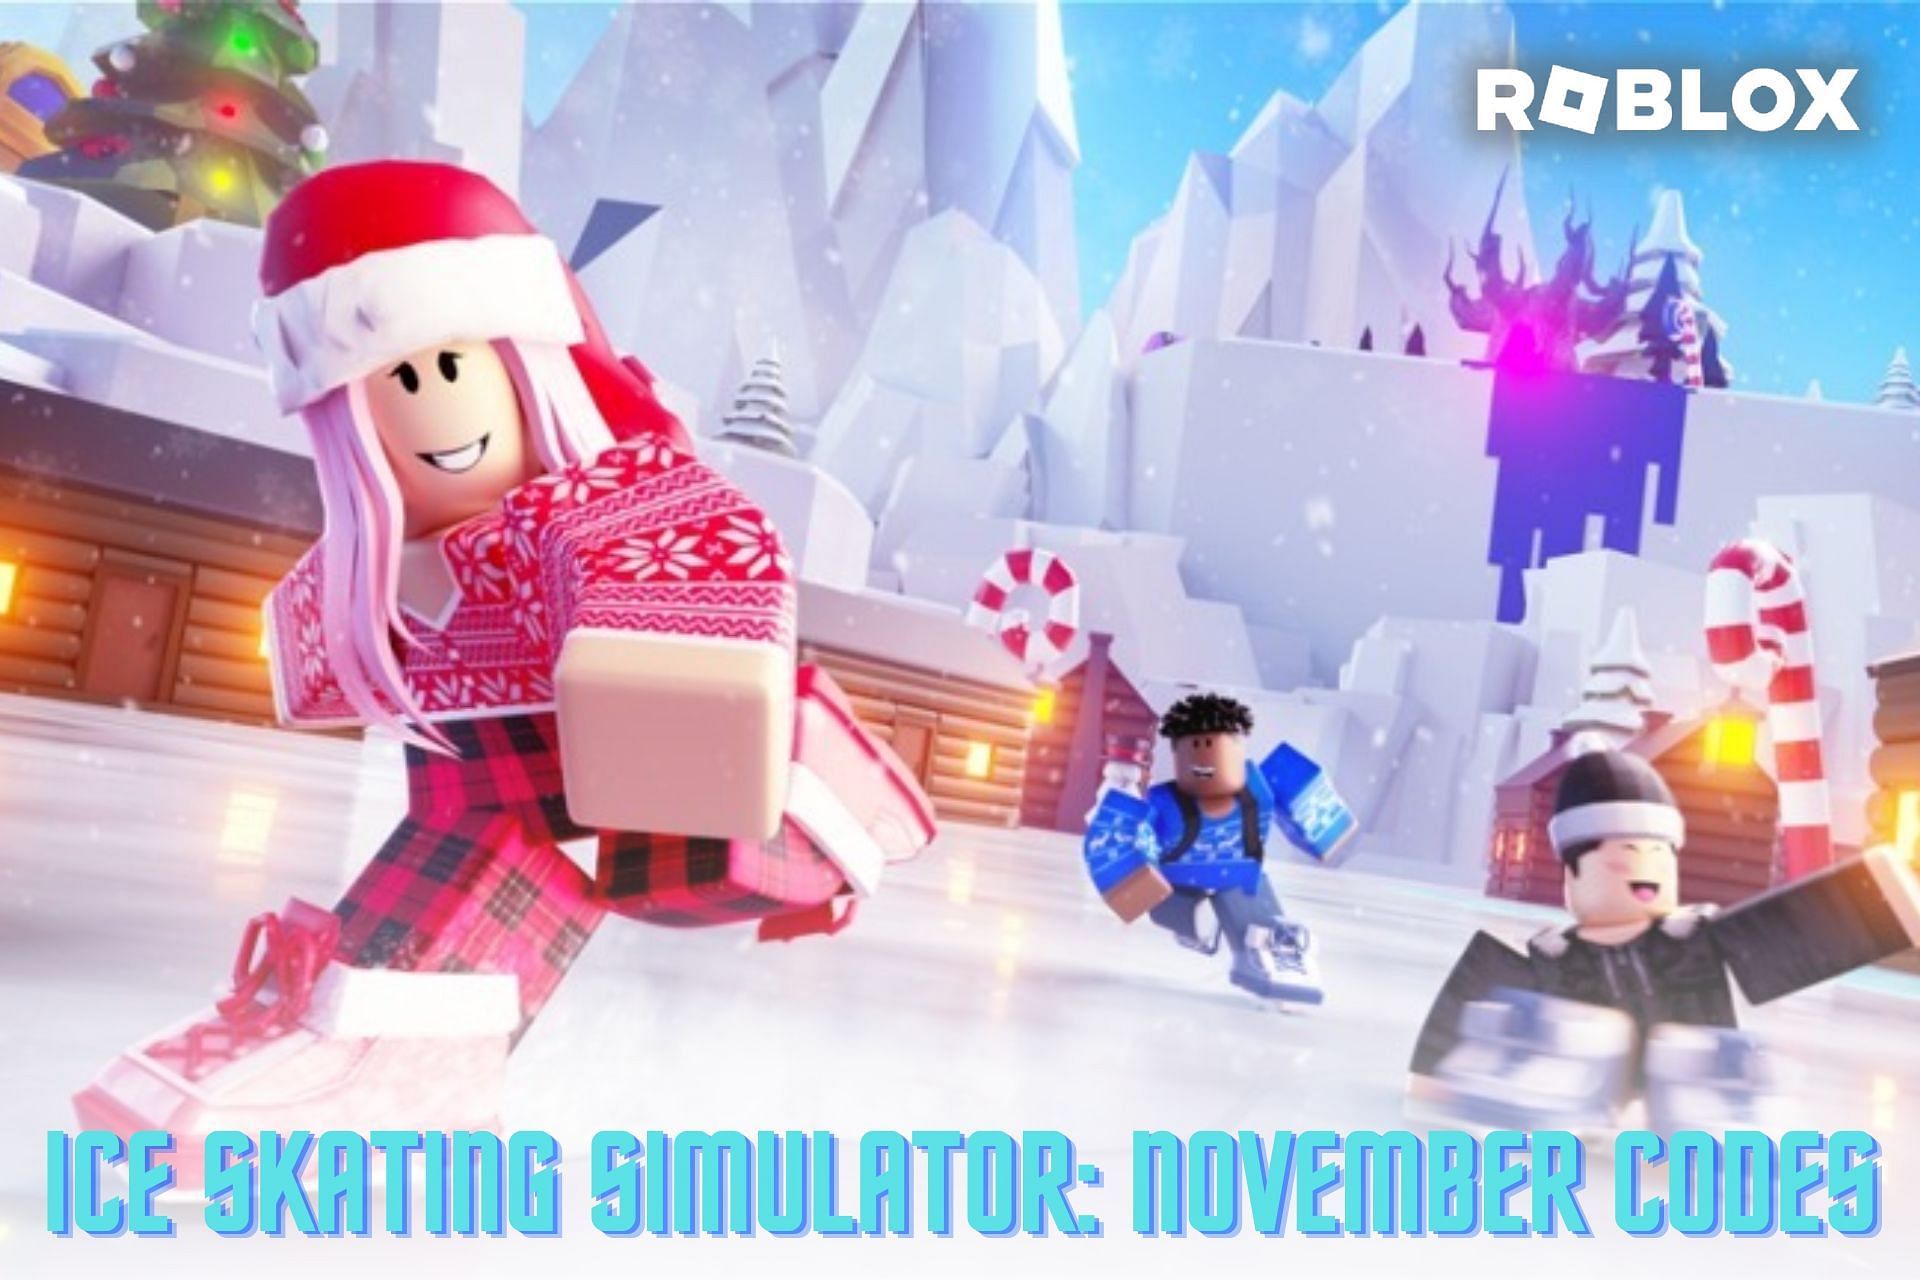 all-coins-and-exp-code-roblox-ice-skating-simulator-youtube